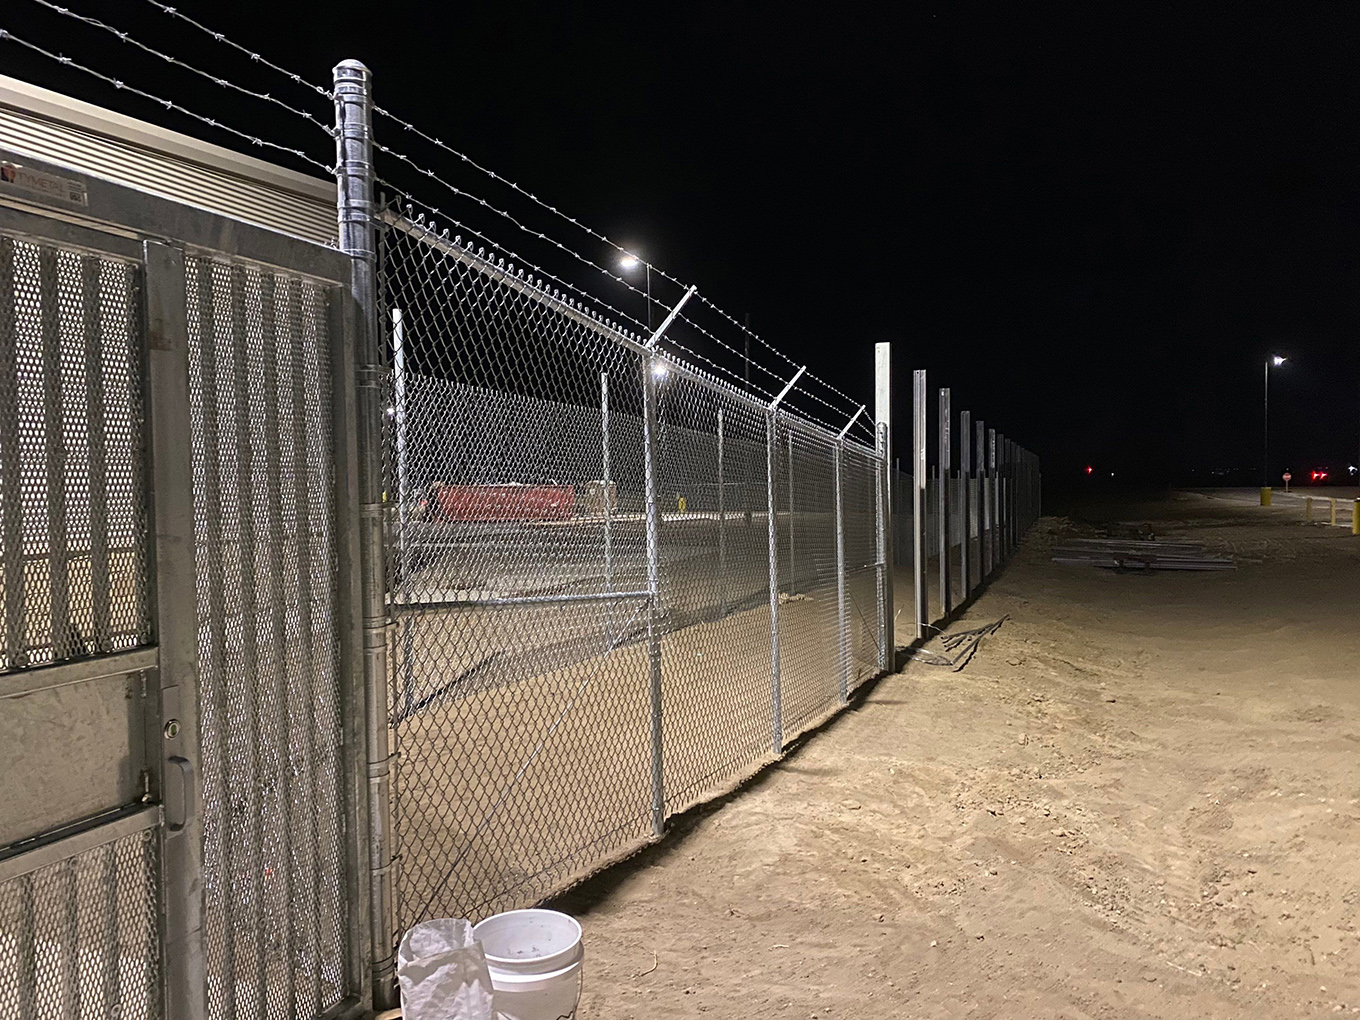 Photo of a commercial chain link fence in Wyoming